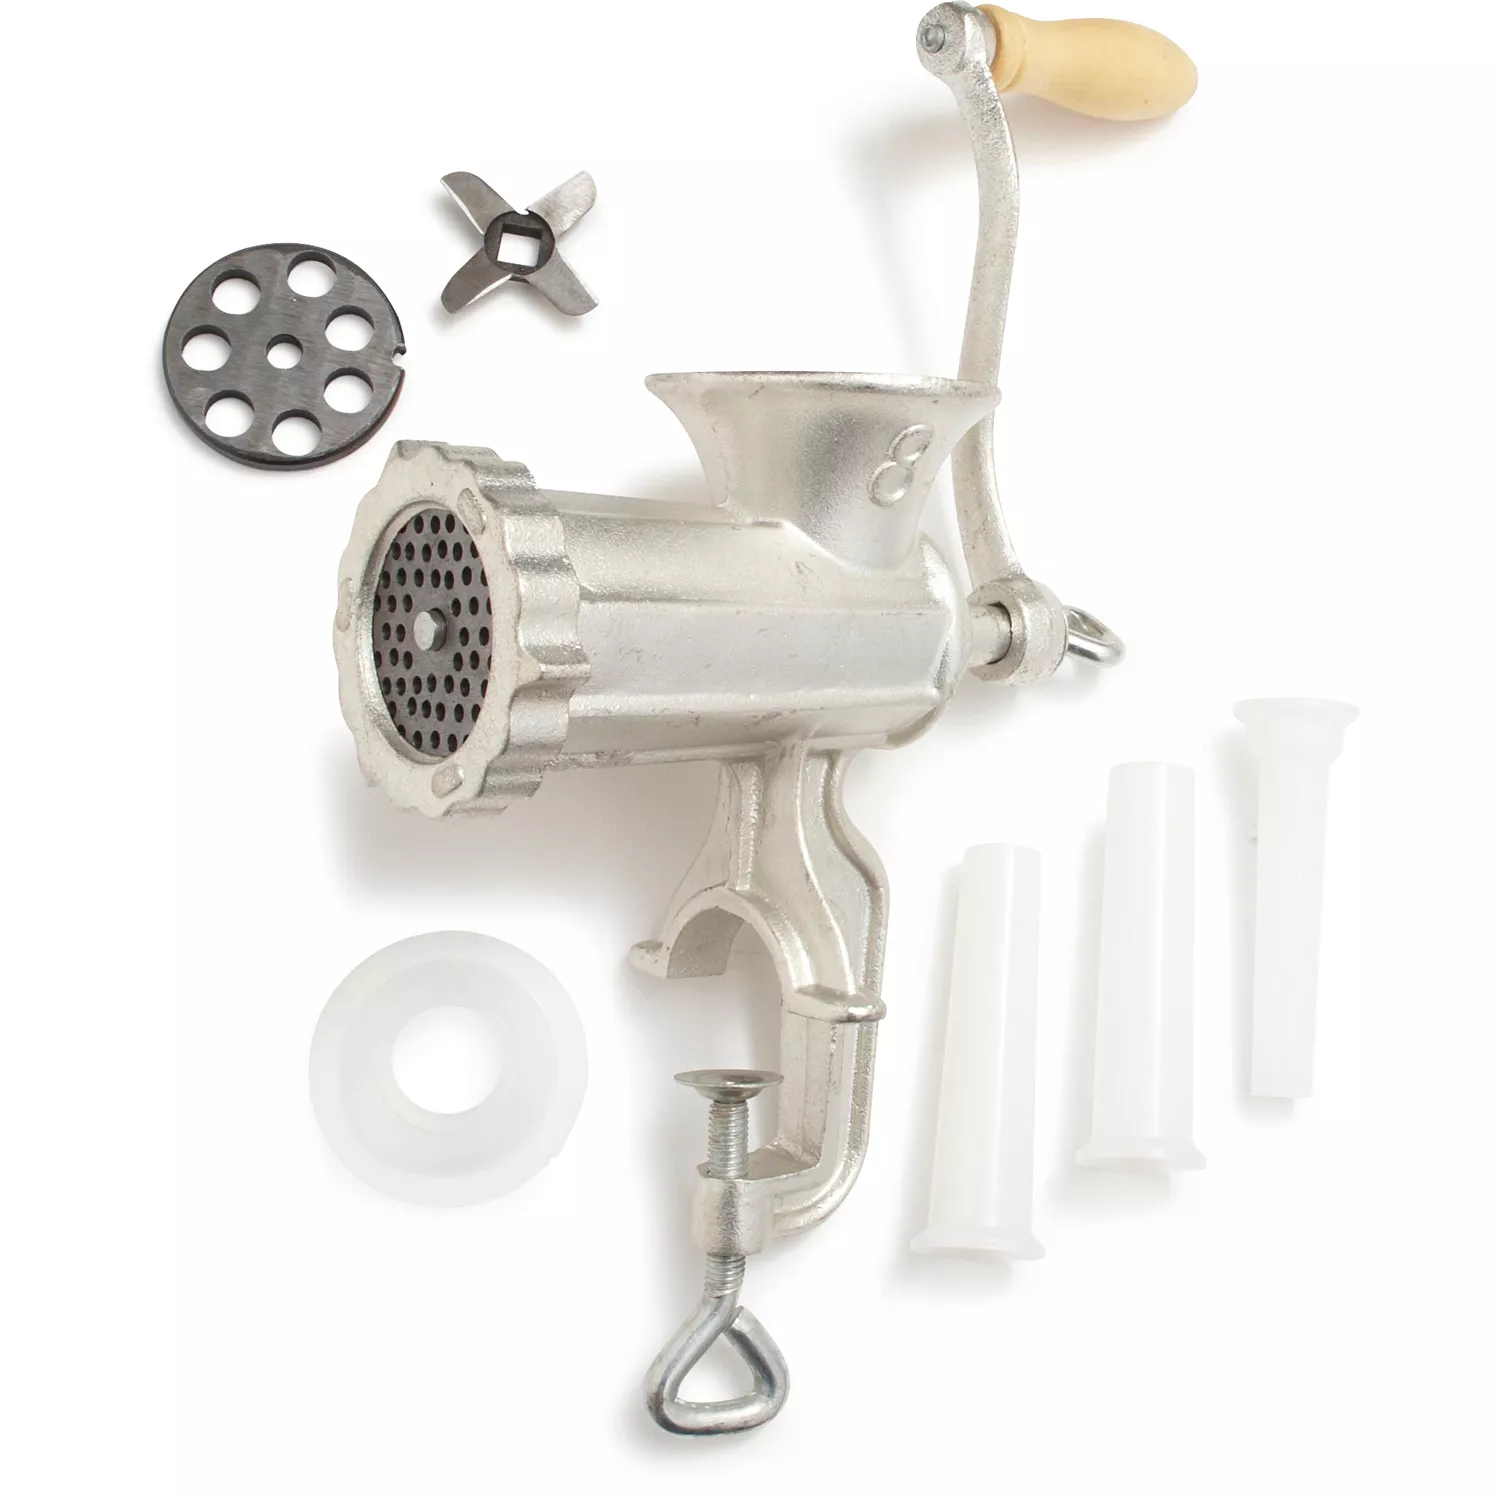 Cucinapro Meat Grinder with Tabletop Clamp & 2 Cutting Disks, Cast Iron Heavy Duty Sausage Maker and Meat Mincer, Silver